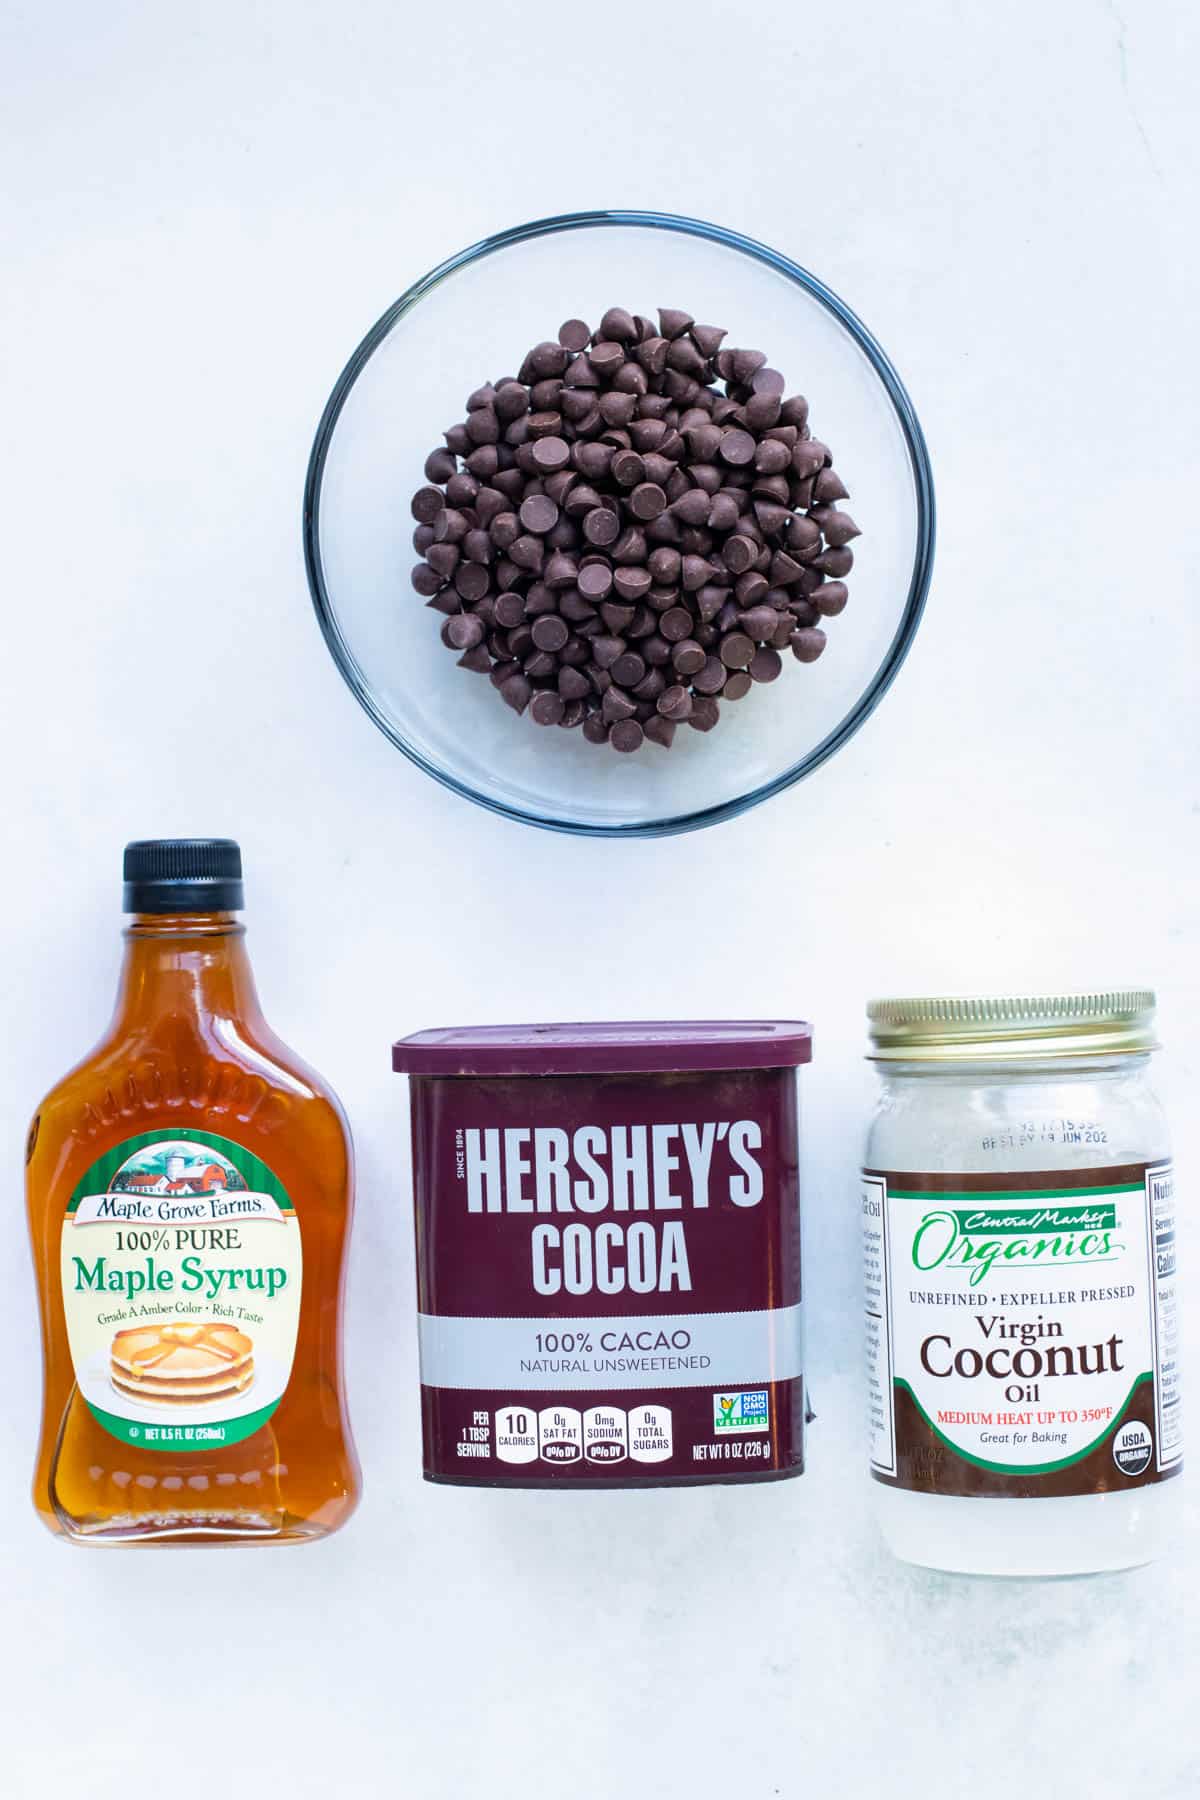 Nutella can be made Paleo with chocolate chips or a coconut oil, cocoa powder, and maple syrup.